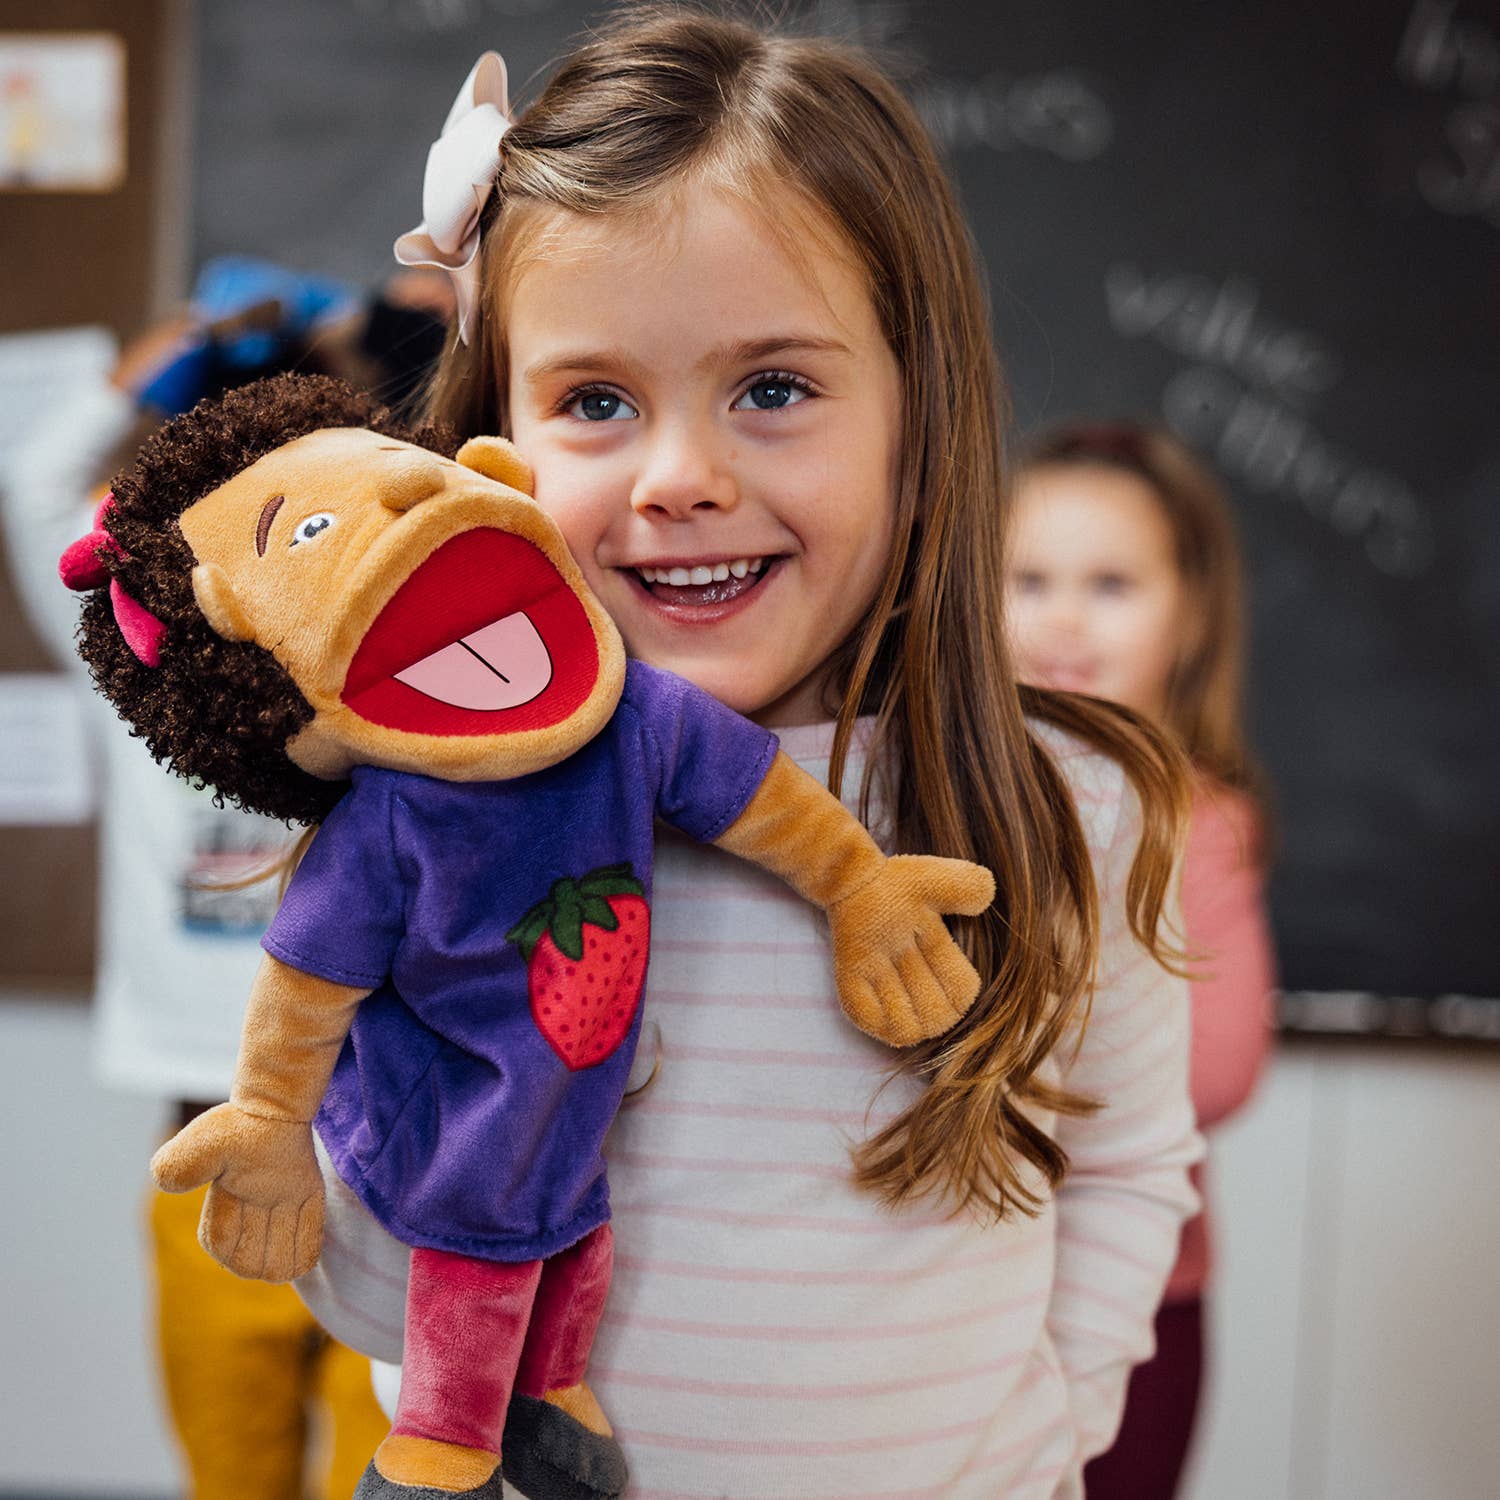 Miriam's Puppet, Showing good sportsmanship, our Kid puppet, Miriam's Puppet is ready for children to learn to express emotions and for imaginary play! Puppets are great for social and emotional learning for early learners! PUPPET SPECIFICS: • 14” long• Meets child safety requirements• Soft, plush material• Movable mouths• Embroidered eyes, Miriam's Puppet,emotions Puppet,Puppet,Puppet,Puppet,Childrens hand puppets,baby puppets,social skills puppets, 